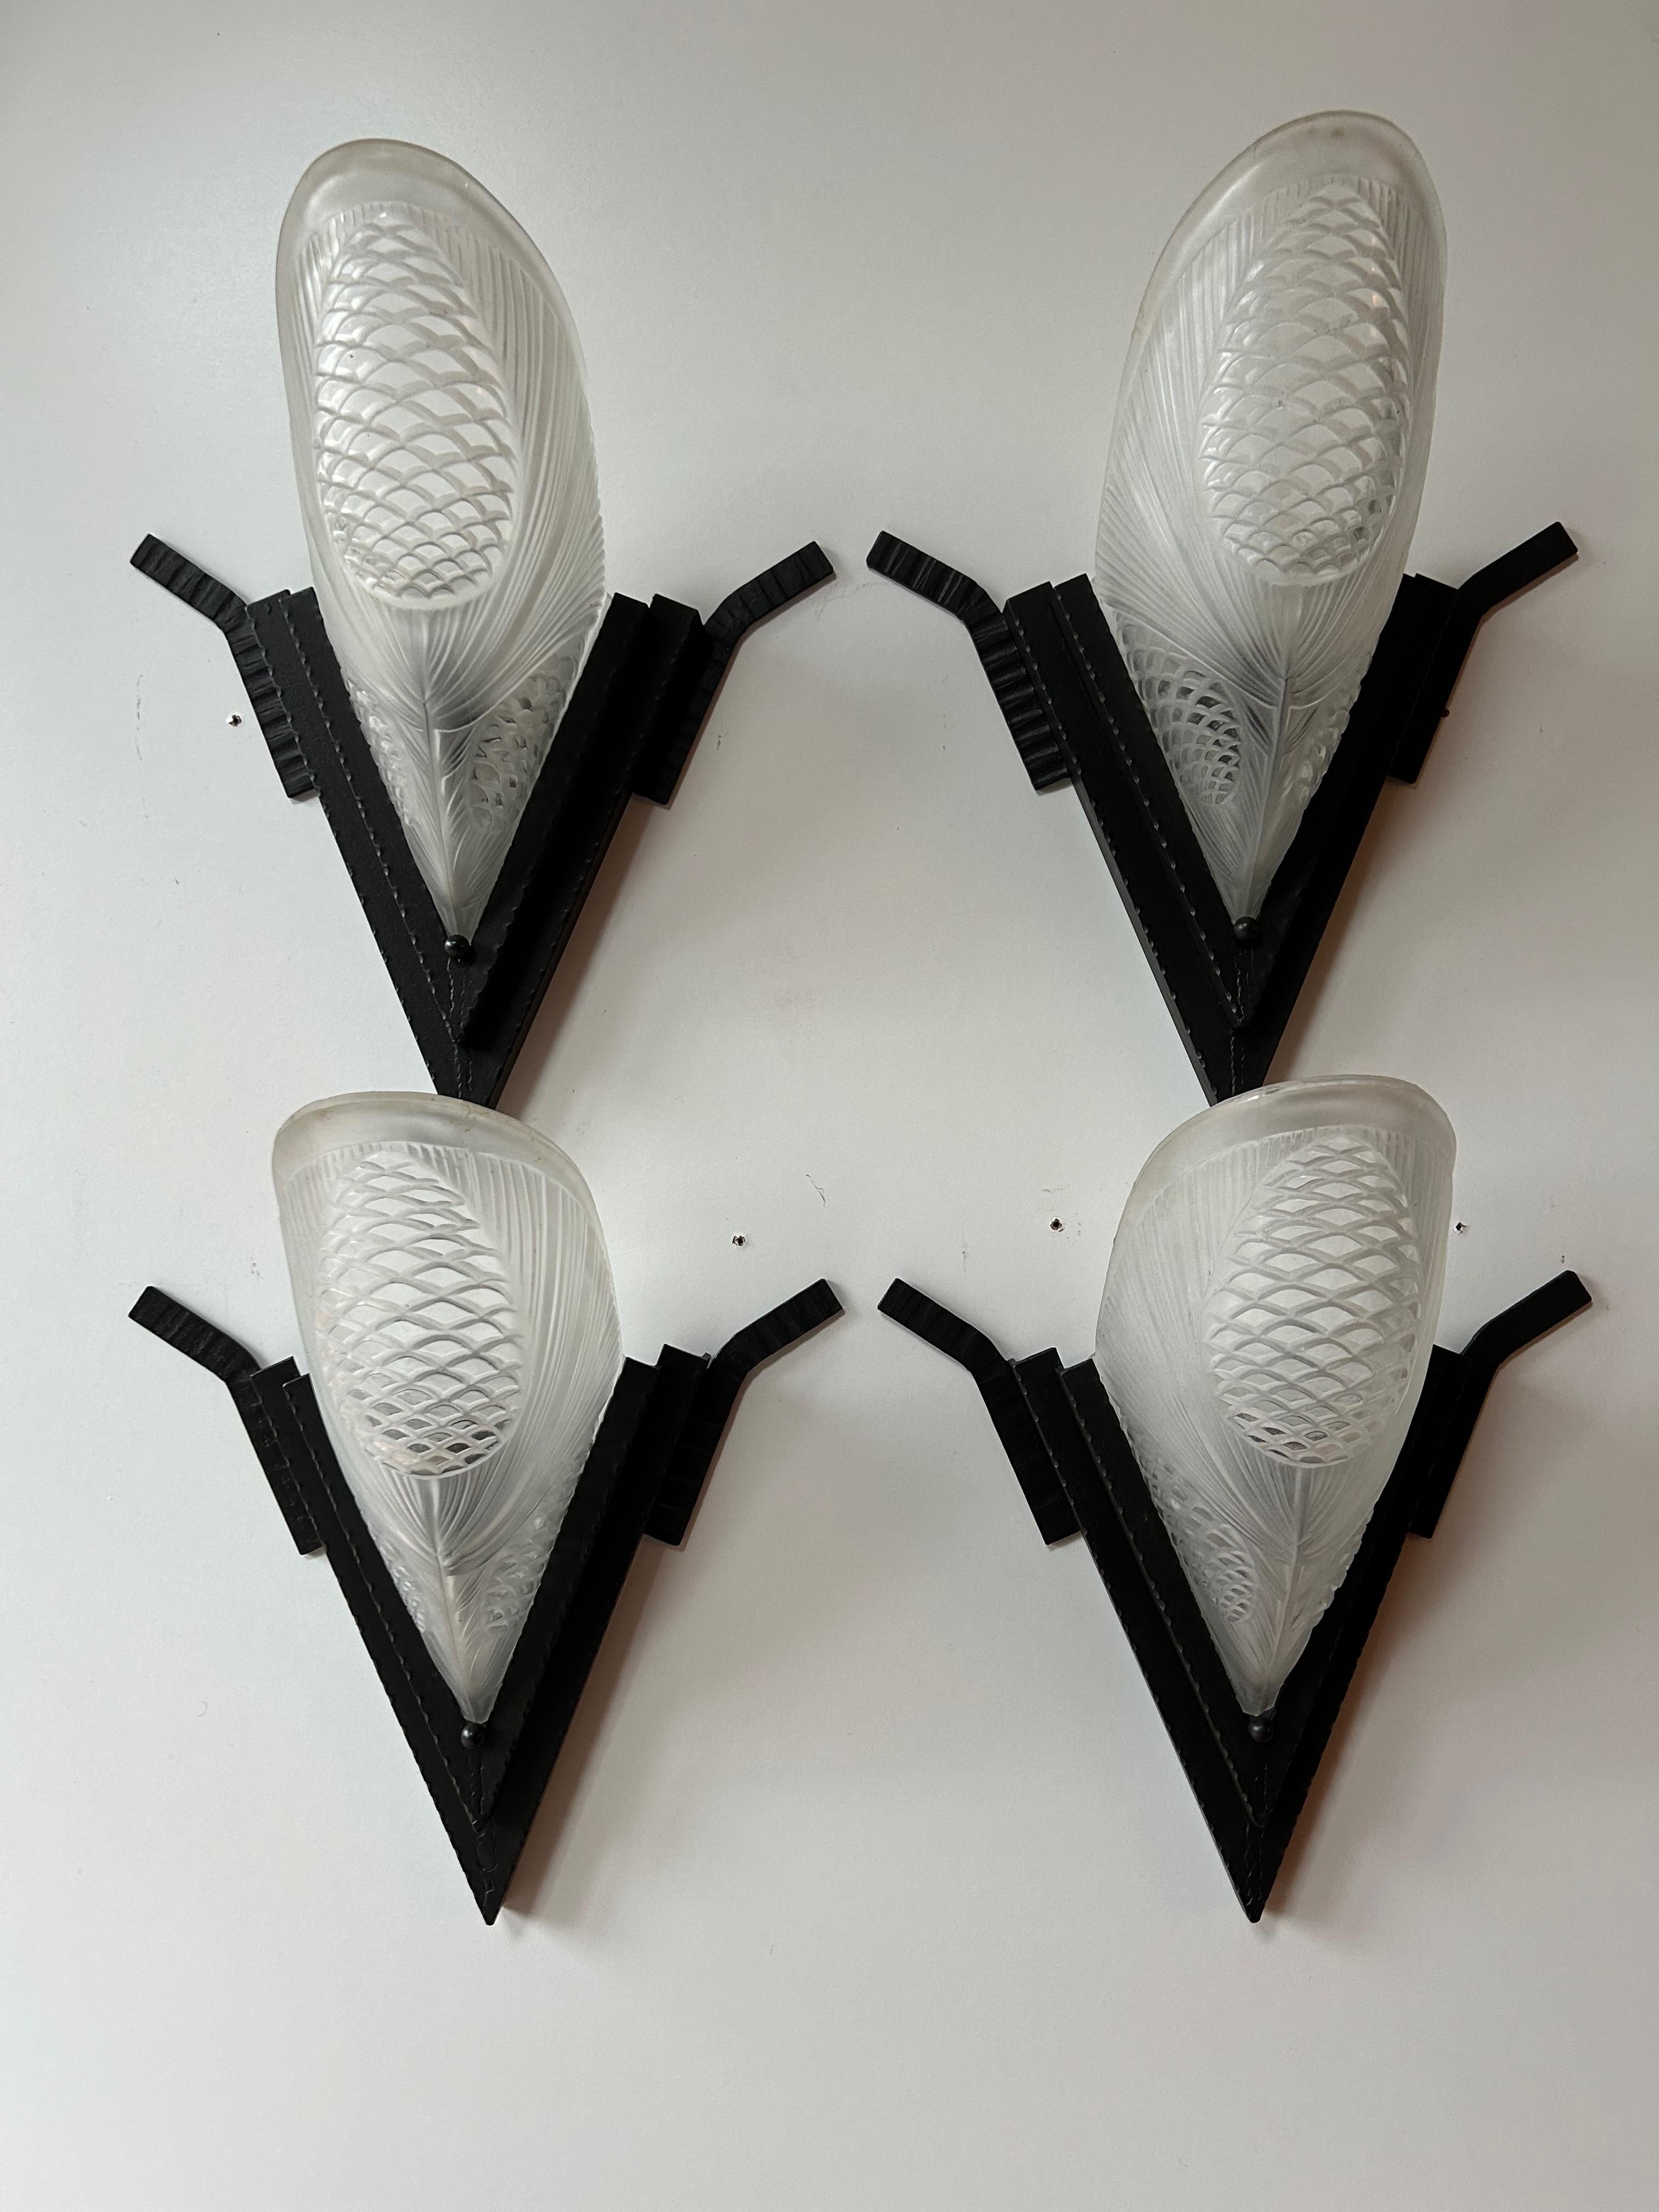 

Suite of 4 art deco wall lights circa 1930.
The frames are wrought iron with a black patina.
Molded glassware with pine cone decoration made by SEVB
(Bagneaux Glassworks Operating Company,
Paris France, late 1920s/1930s.)
In perfect condition,